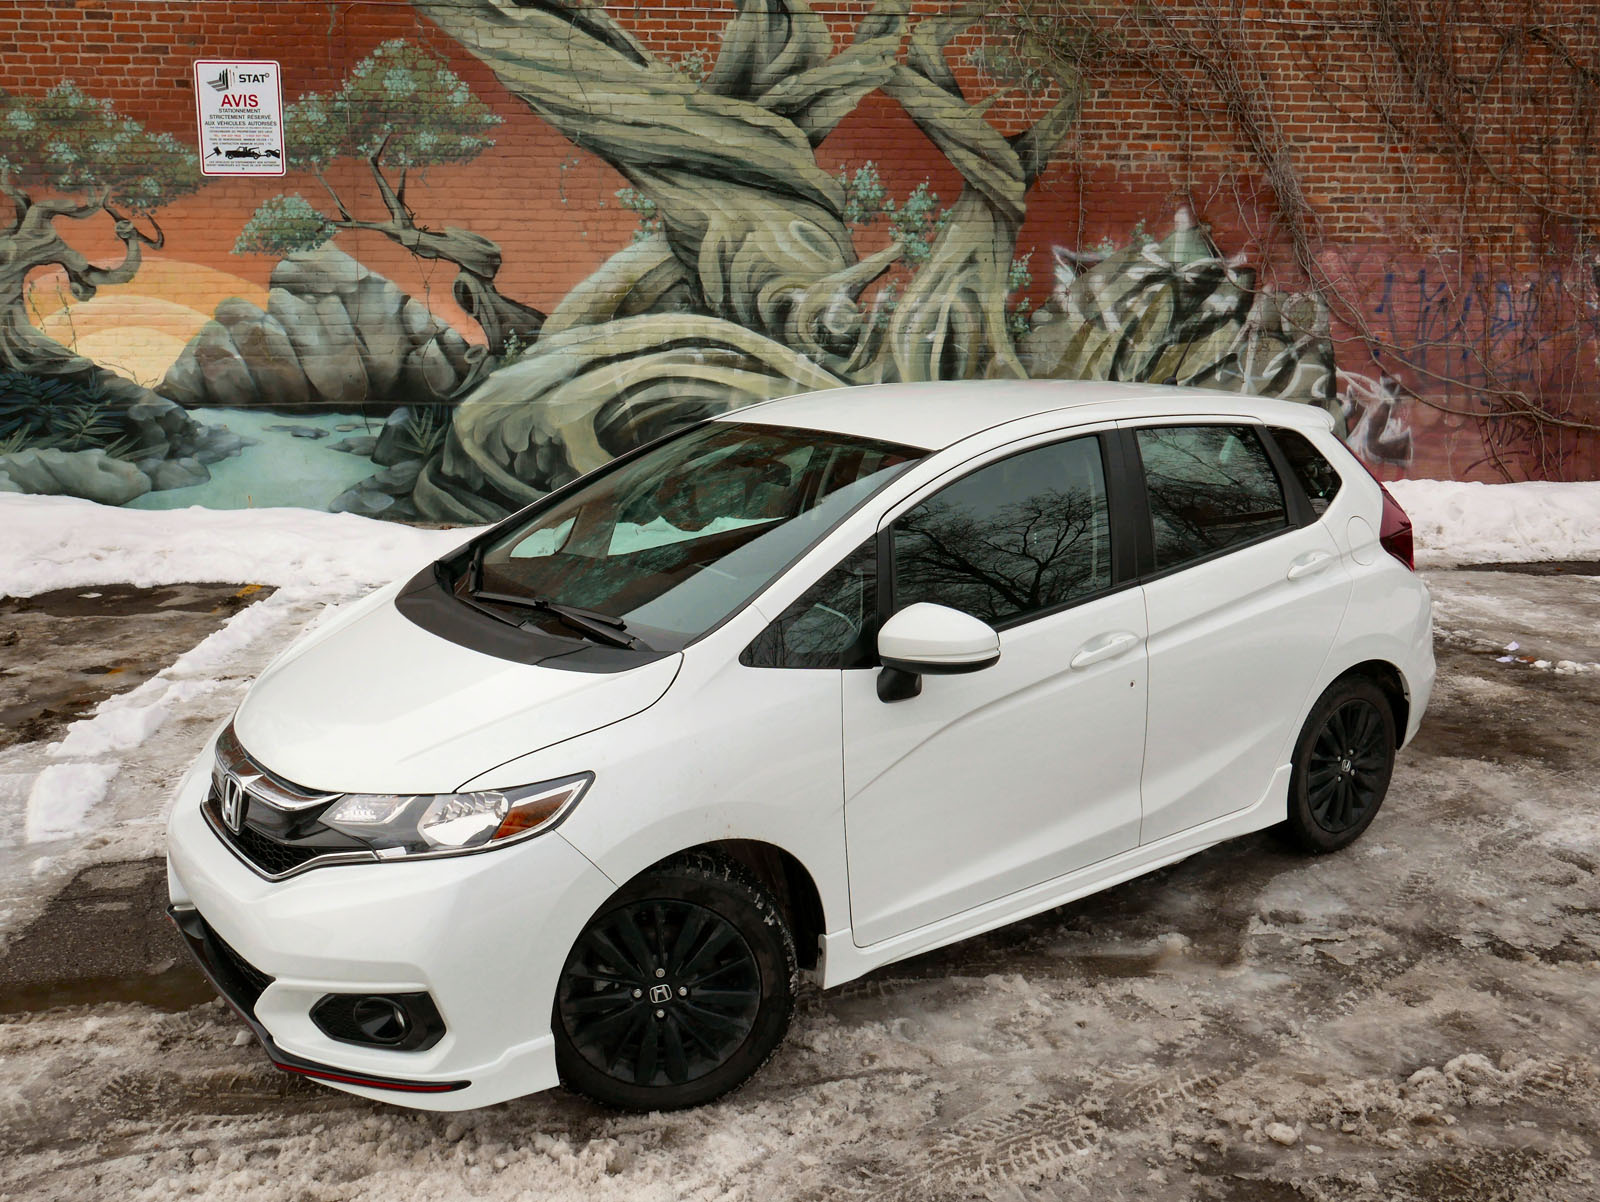 2018 Honda Fit Review: Tiny Hints of Type R Lineage - AutoGuide.com